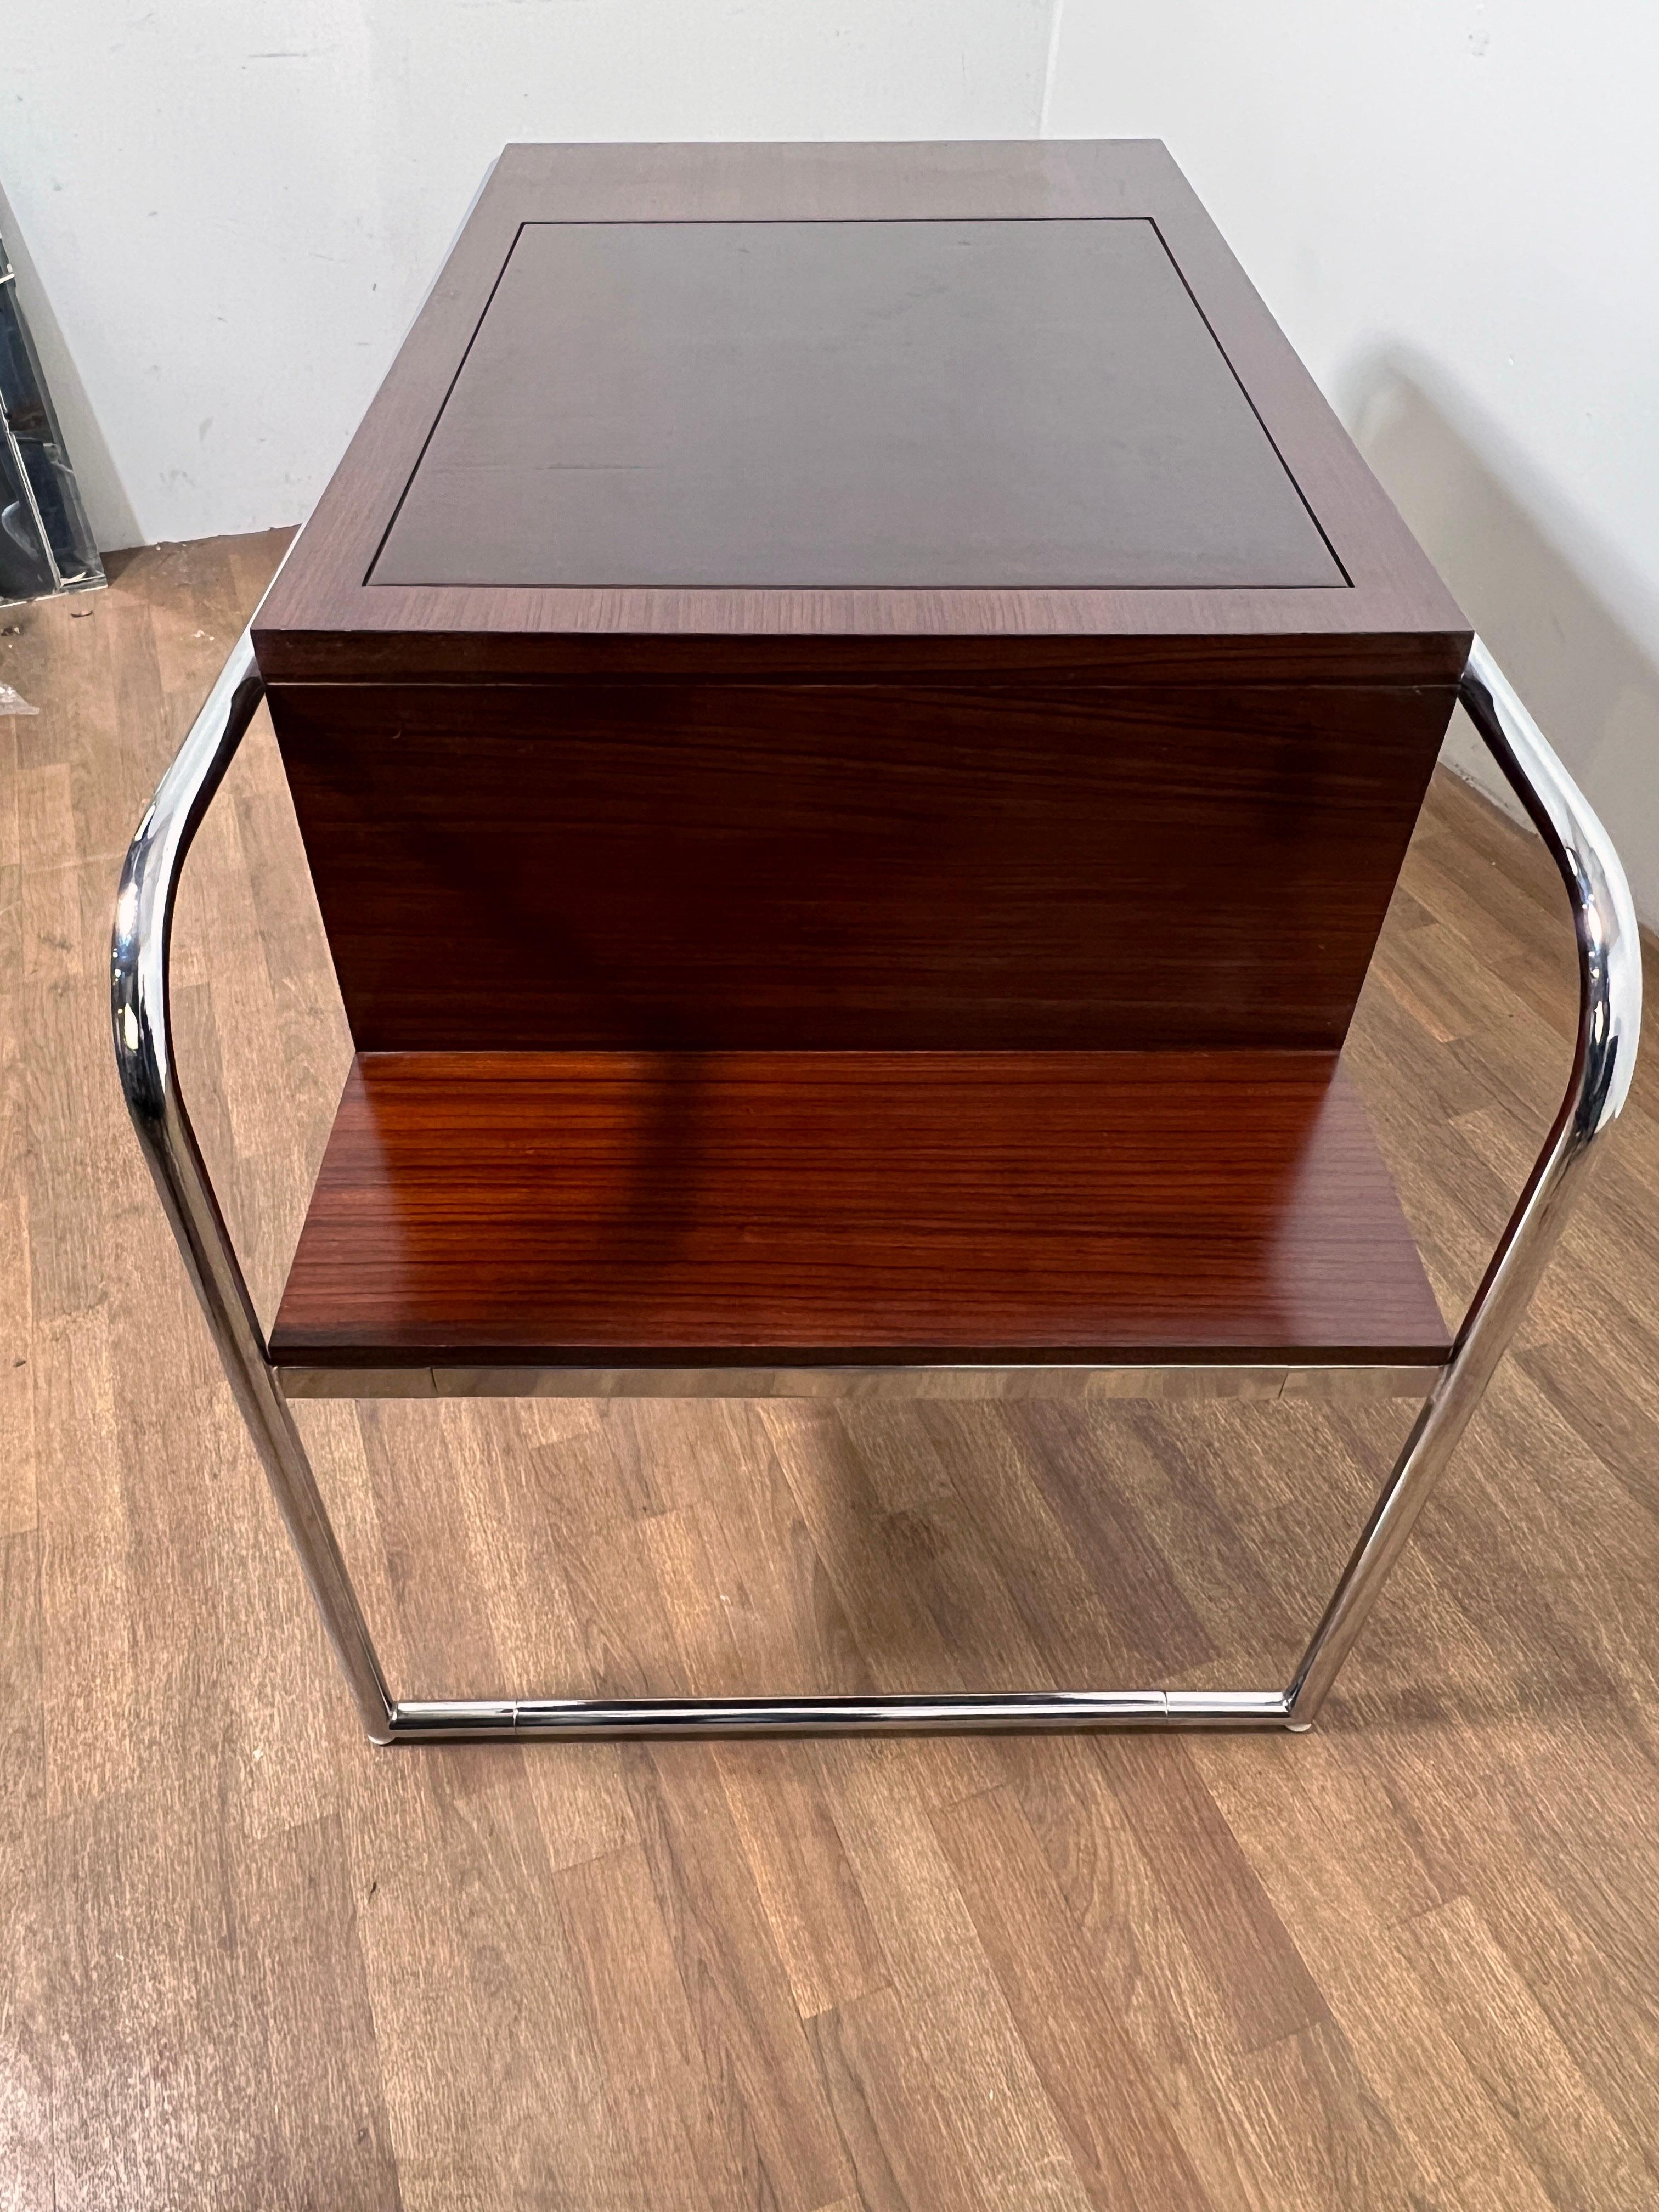 Ralph Lauren Bauhaus Inspired Desk in Wenge, Chrome and Leather 1